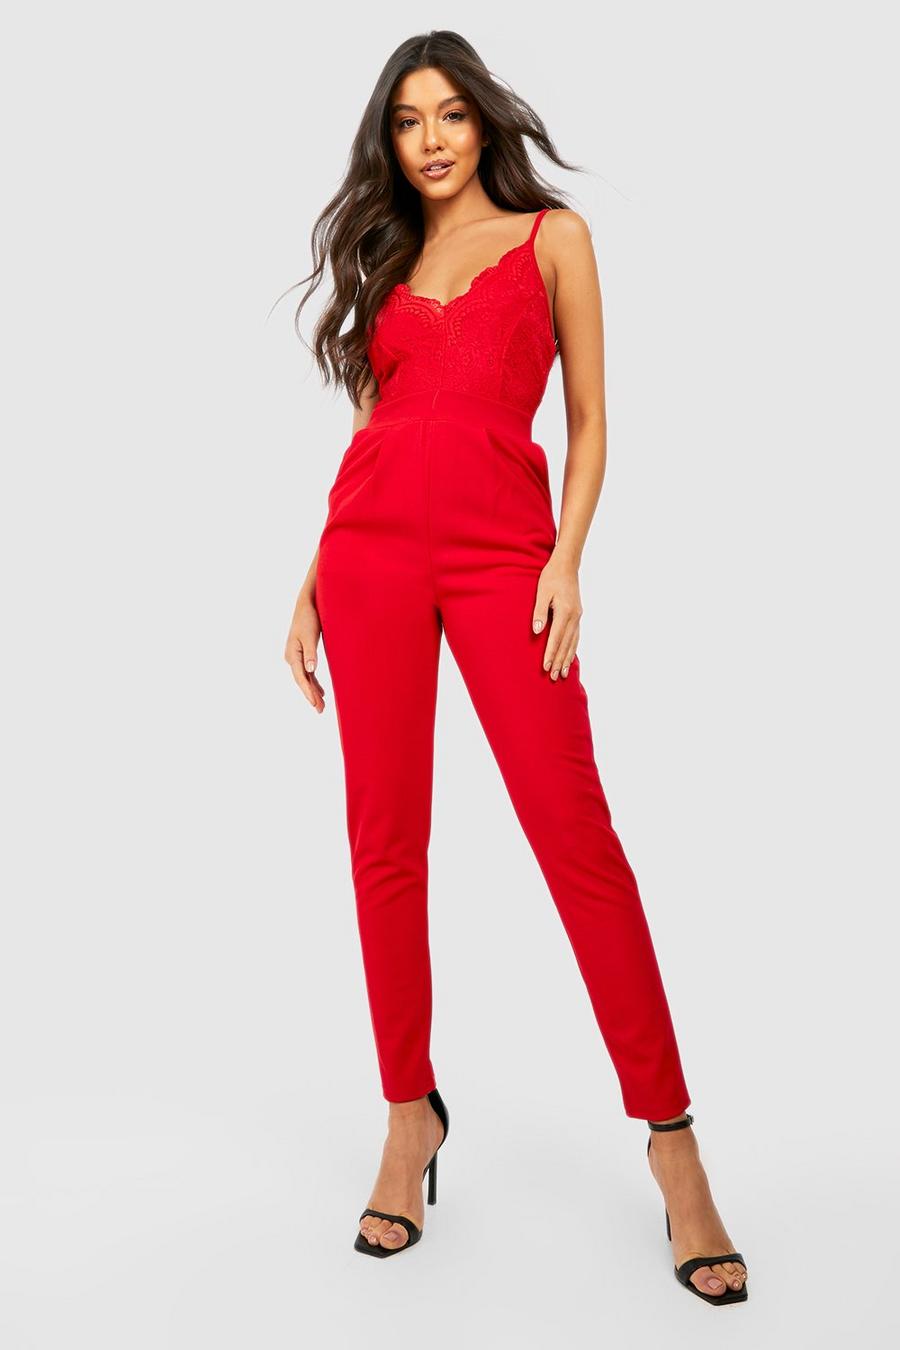 Red Strappy Lace Tapered Leg Jumpsuit